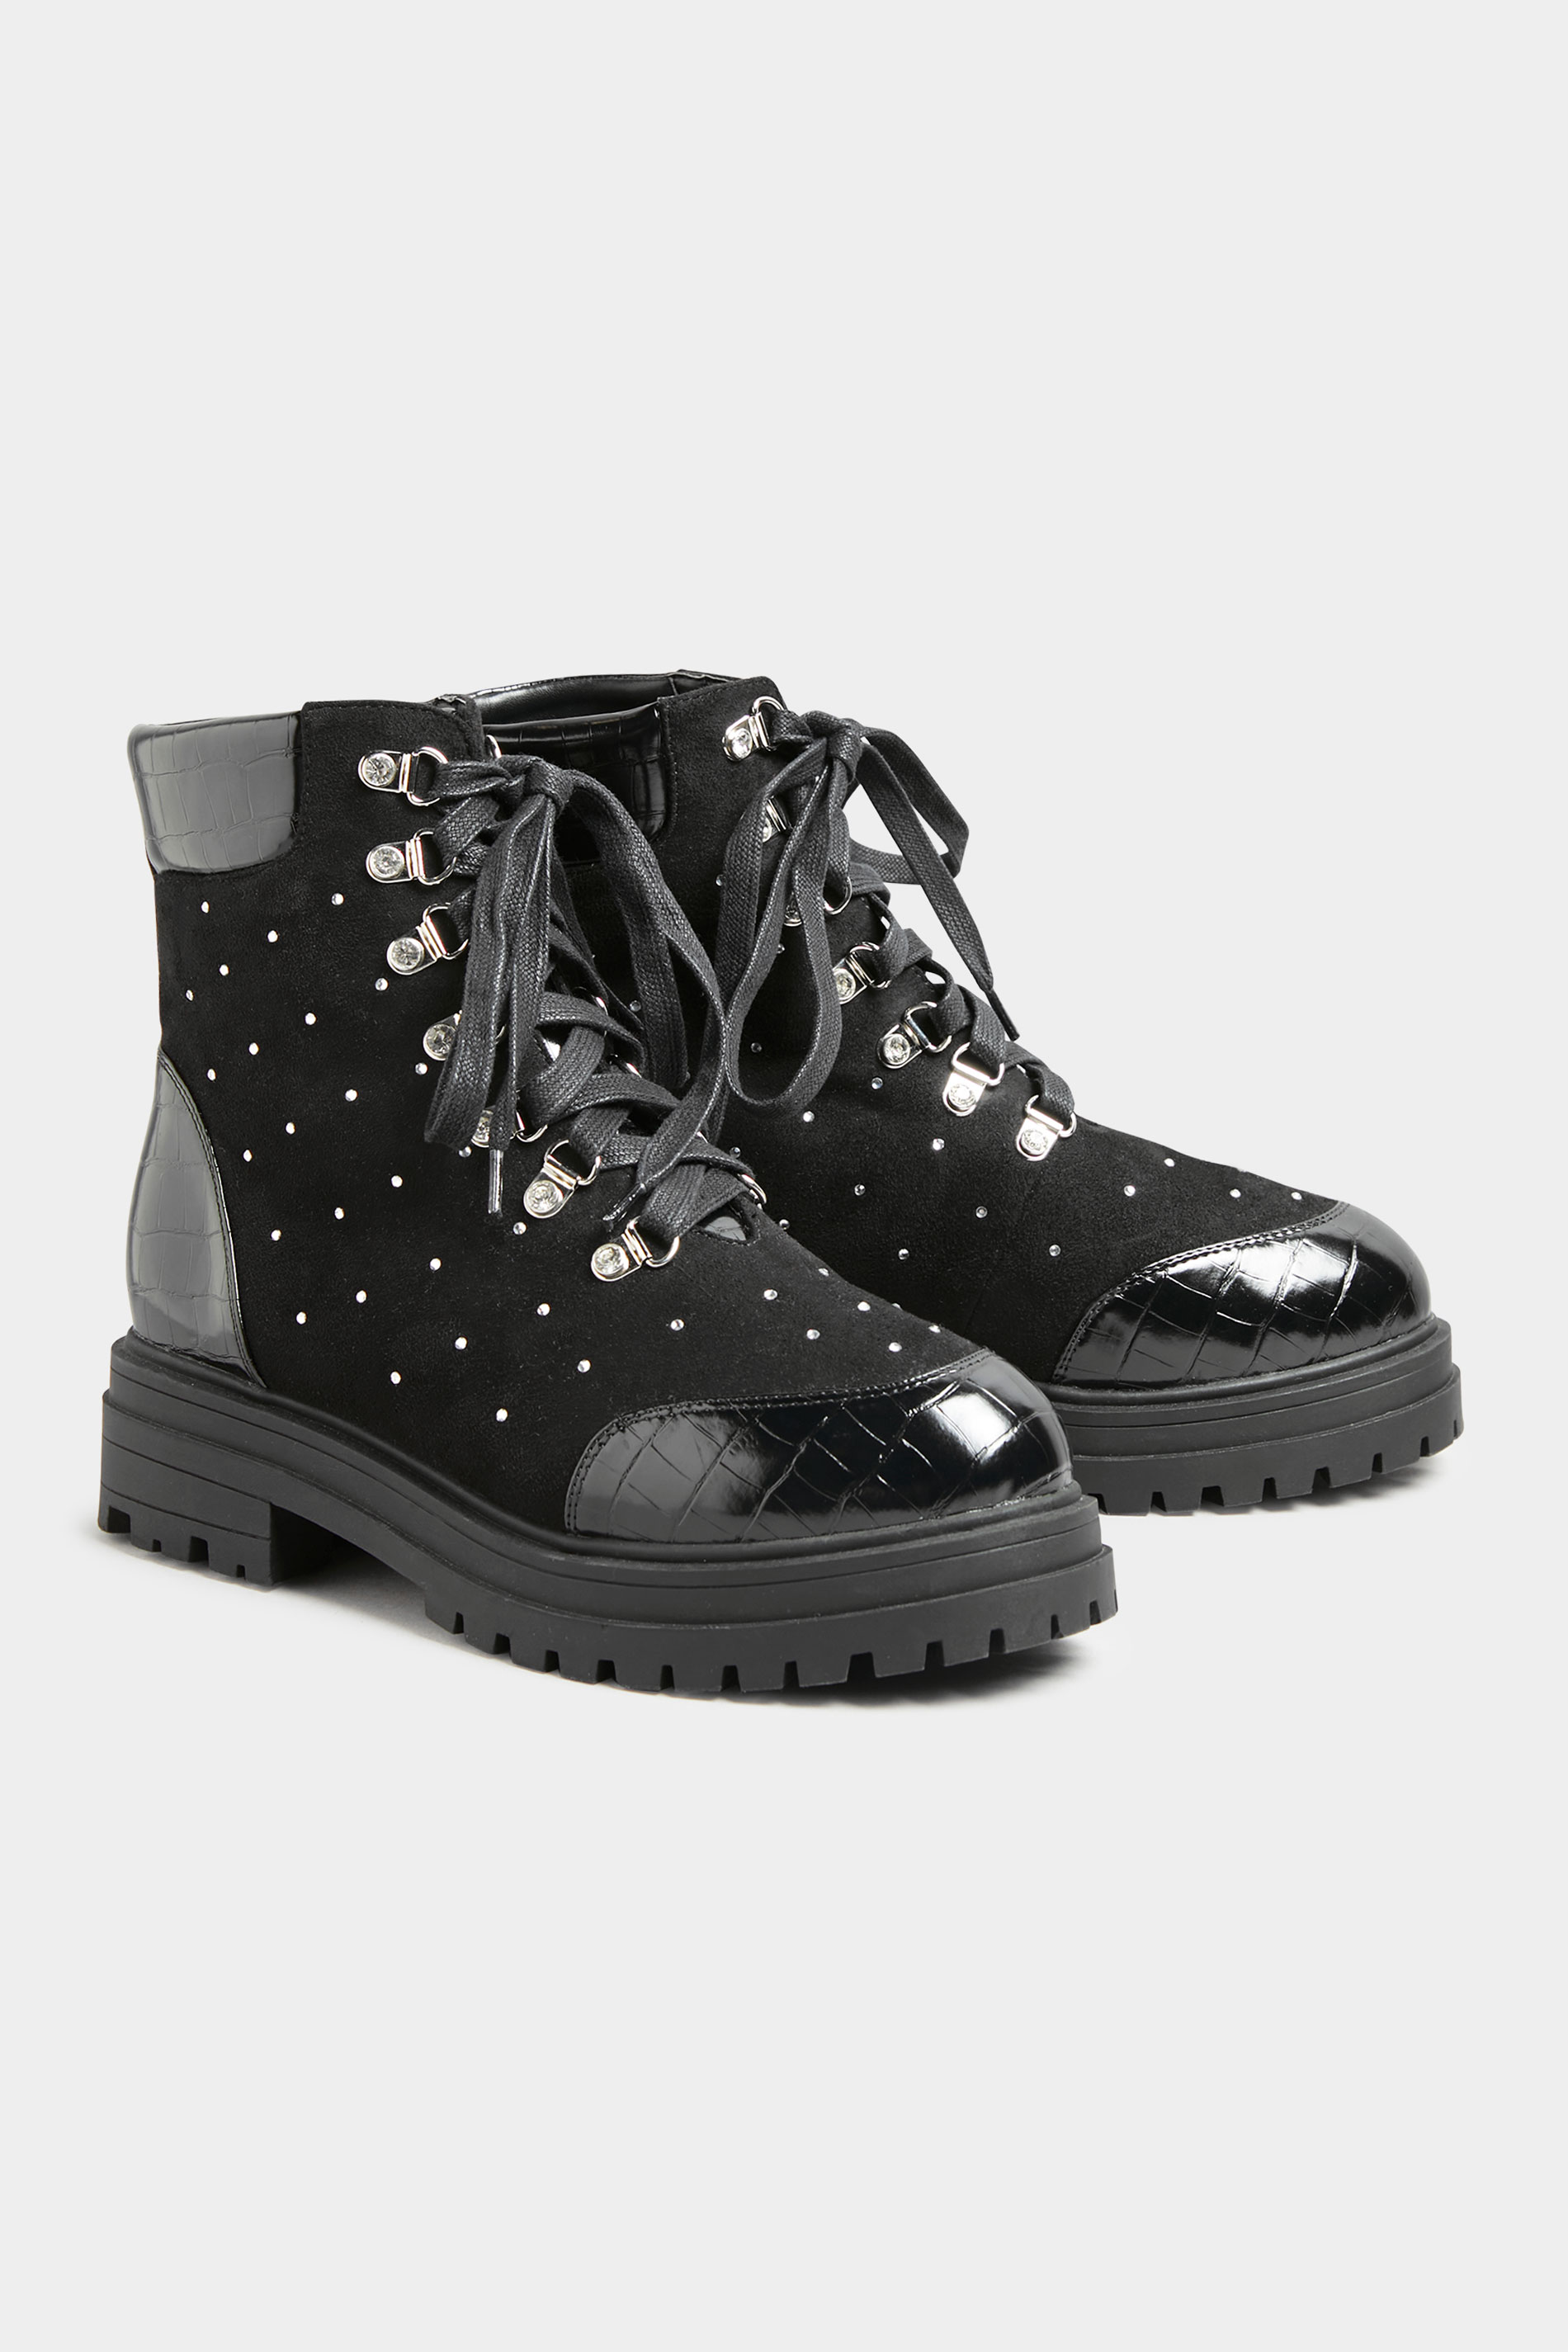 LIMITED COLLECTION Black Faux Suede Diamante Stud Lace Up Boots In Wide Fit_C.jpg